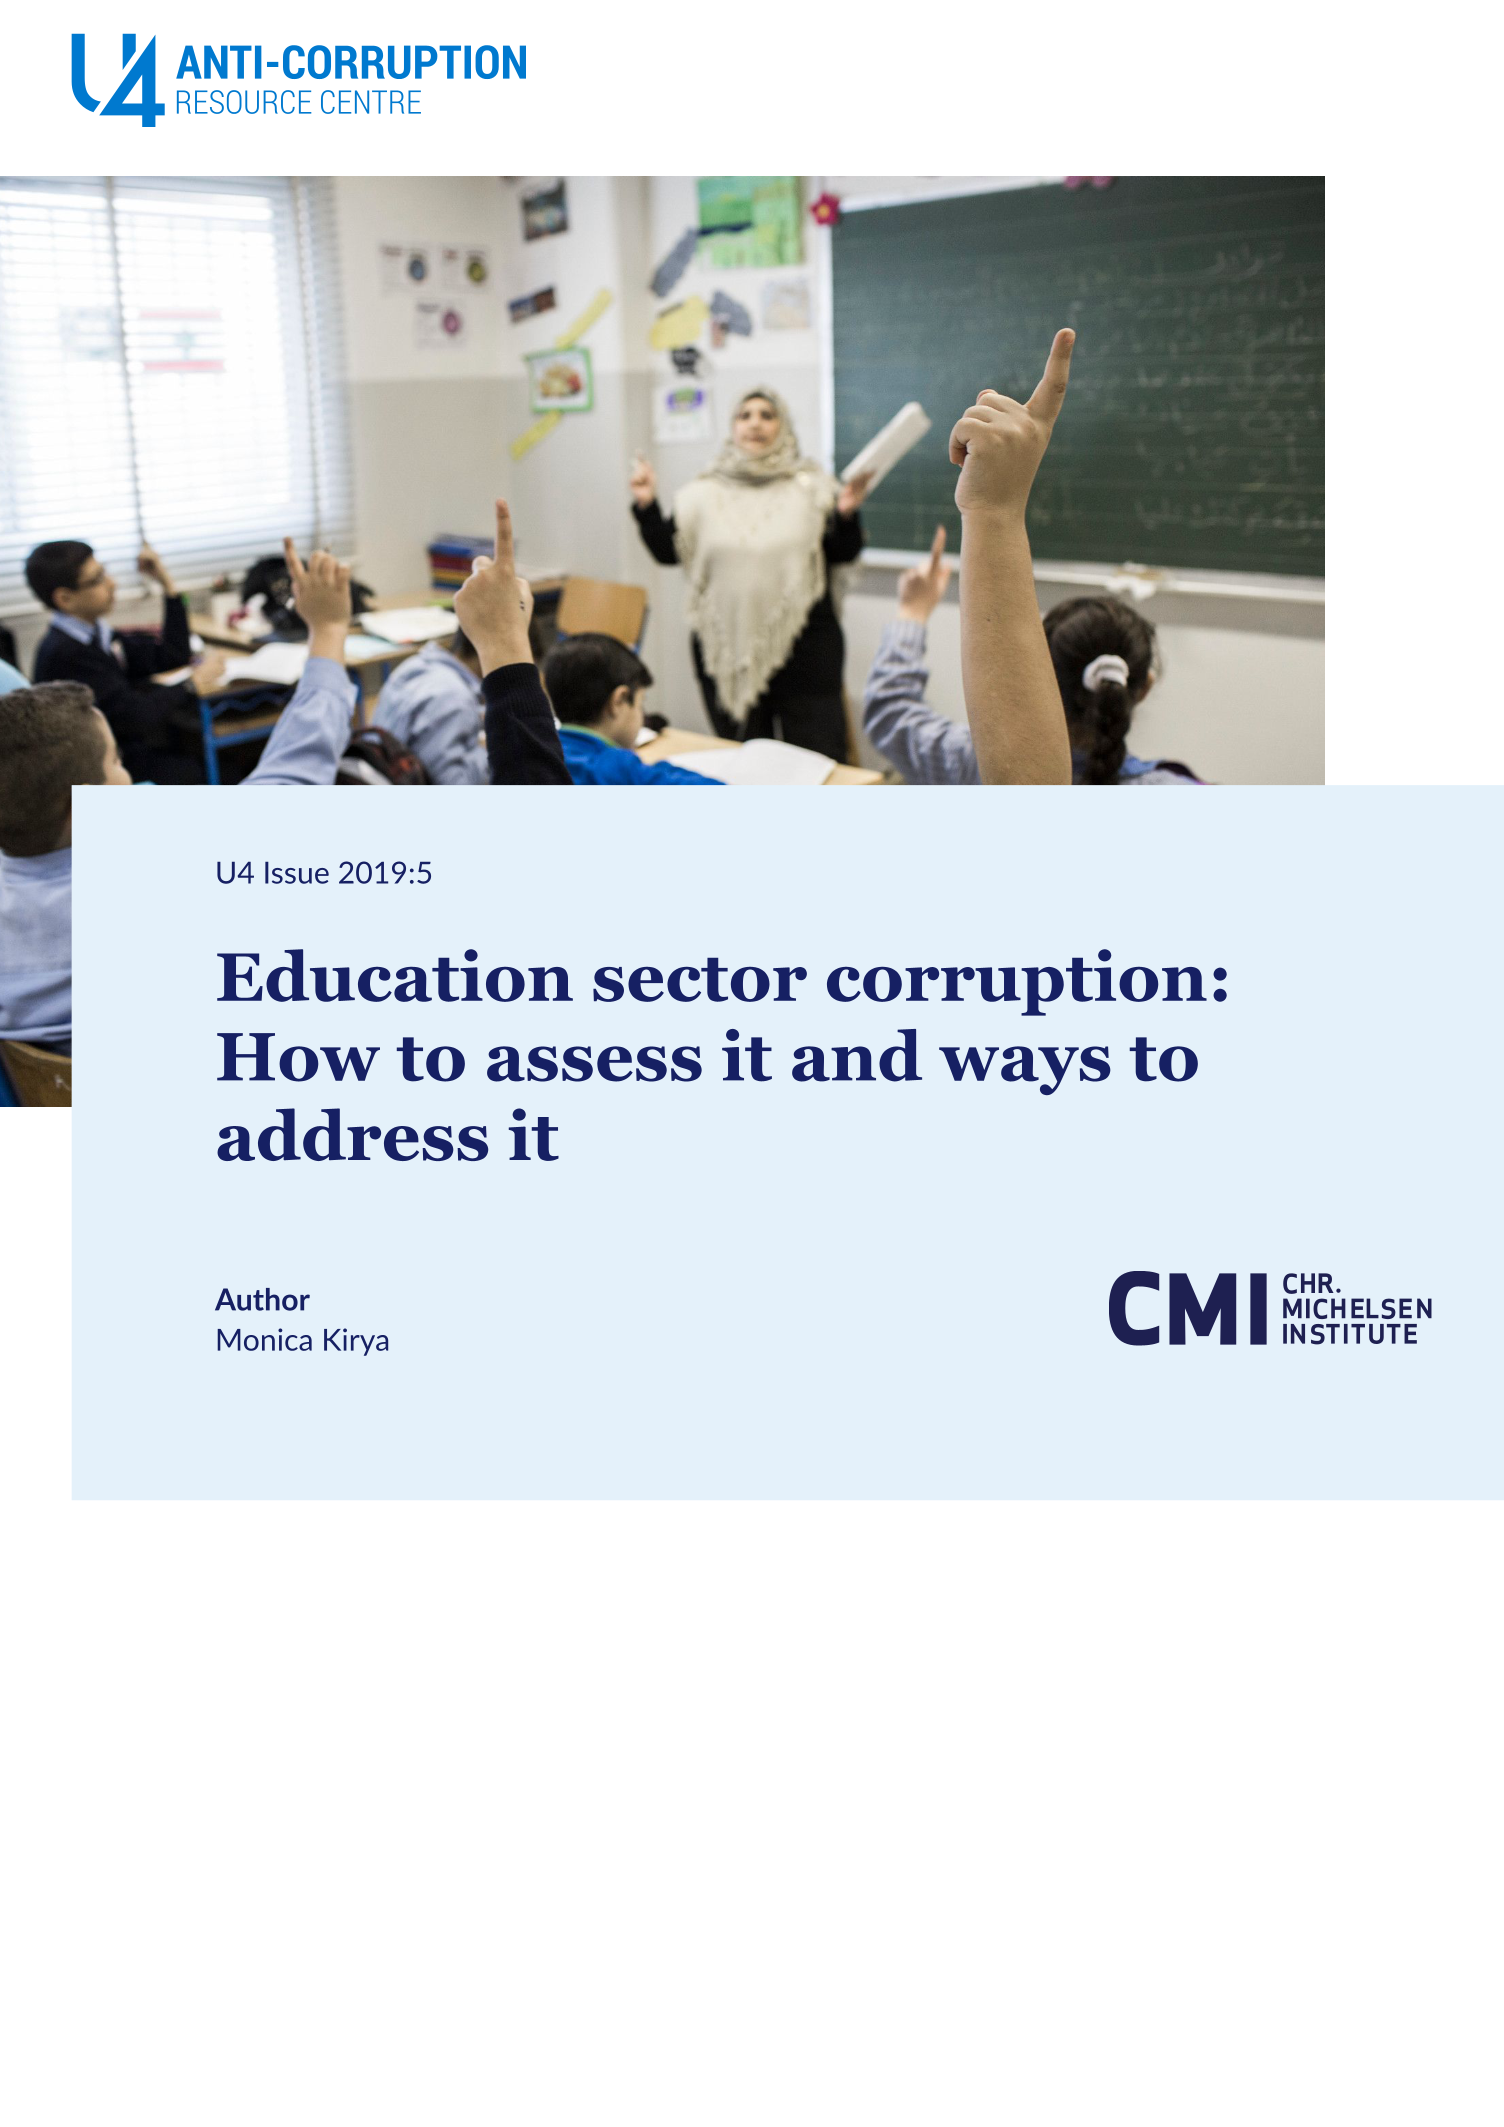 Education sector corruption: How to assess it and ways to address it